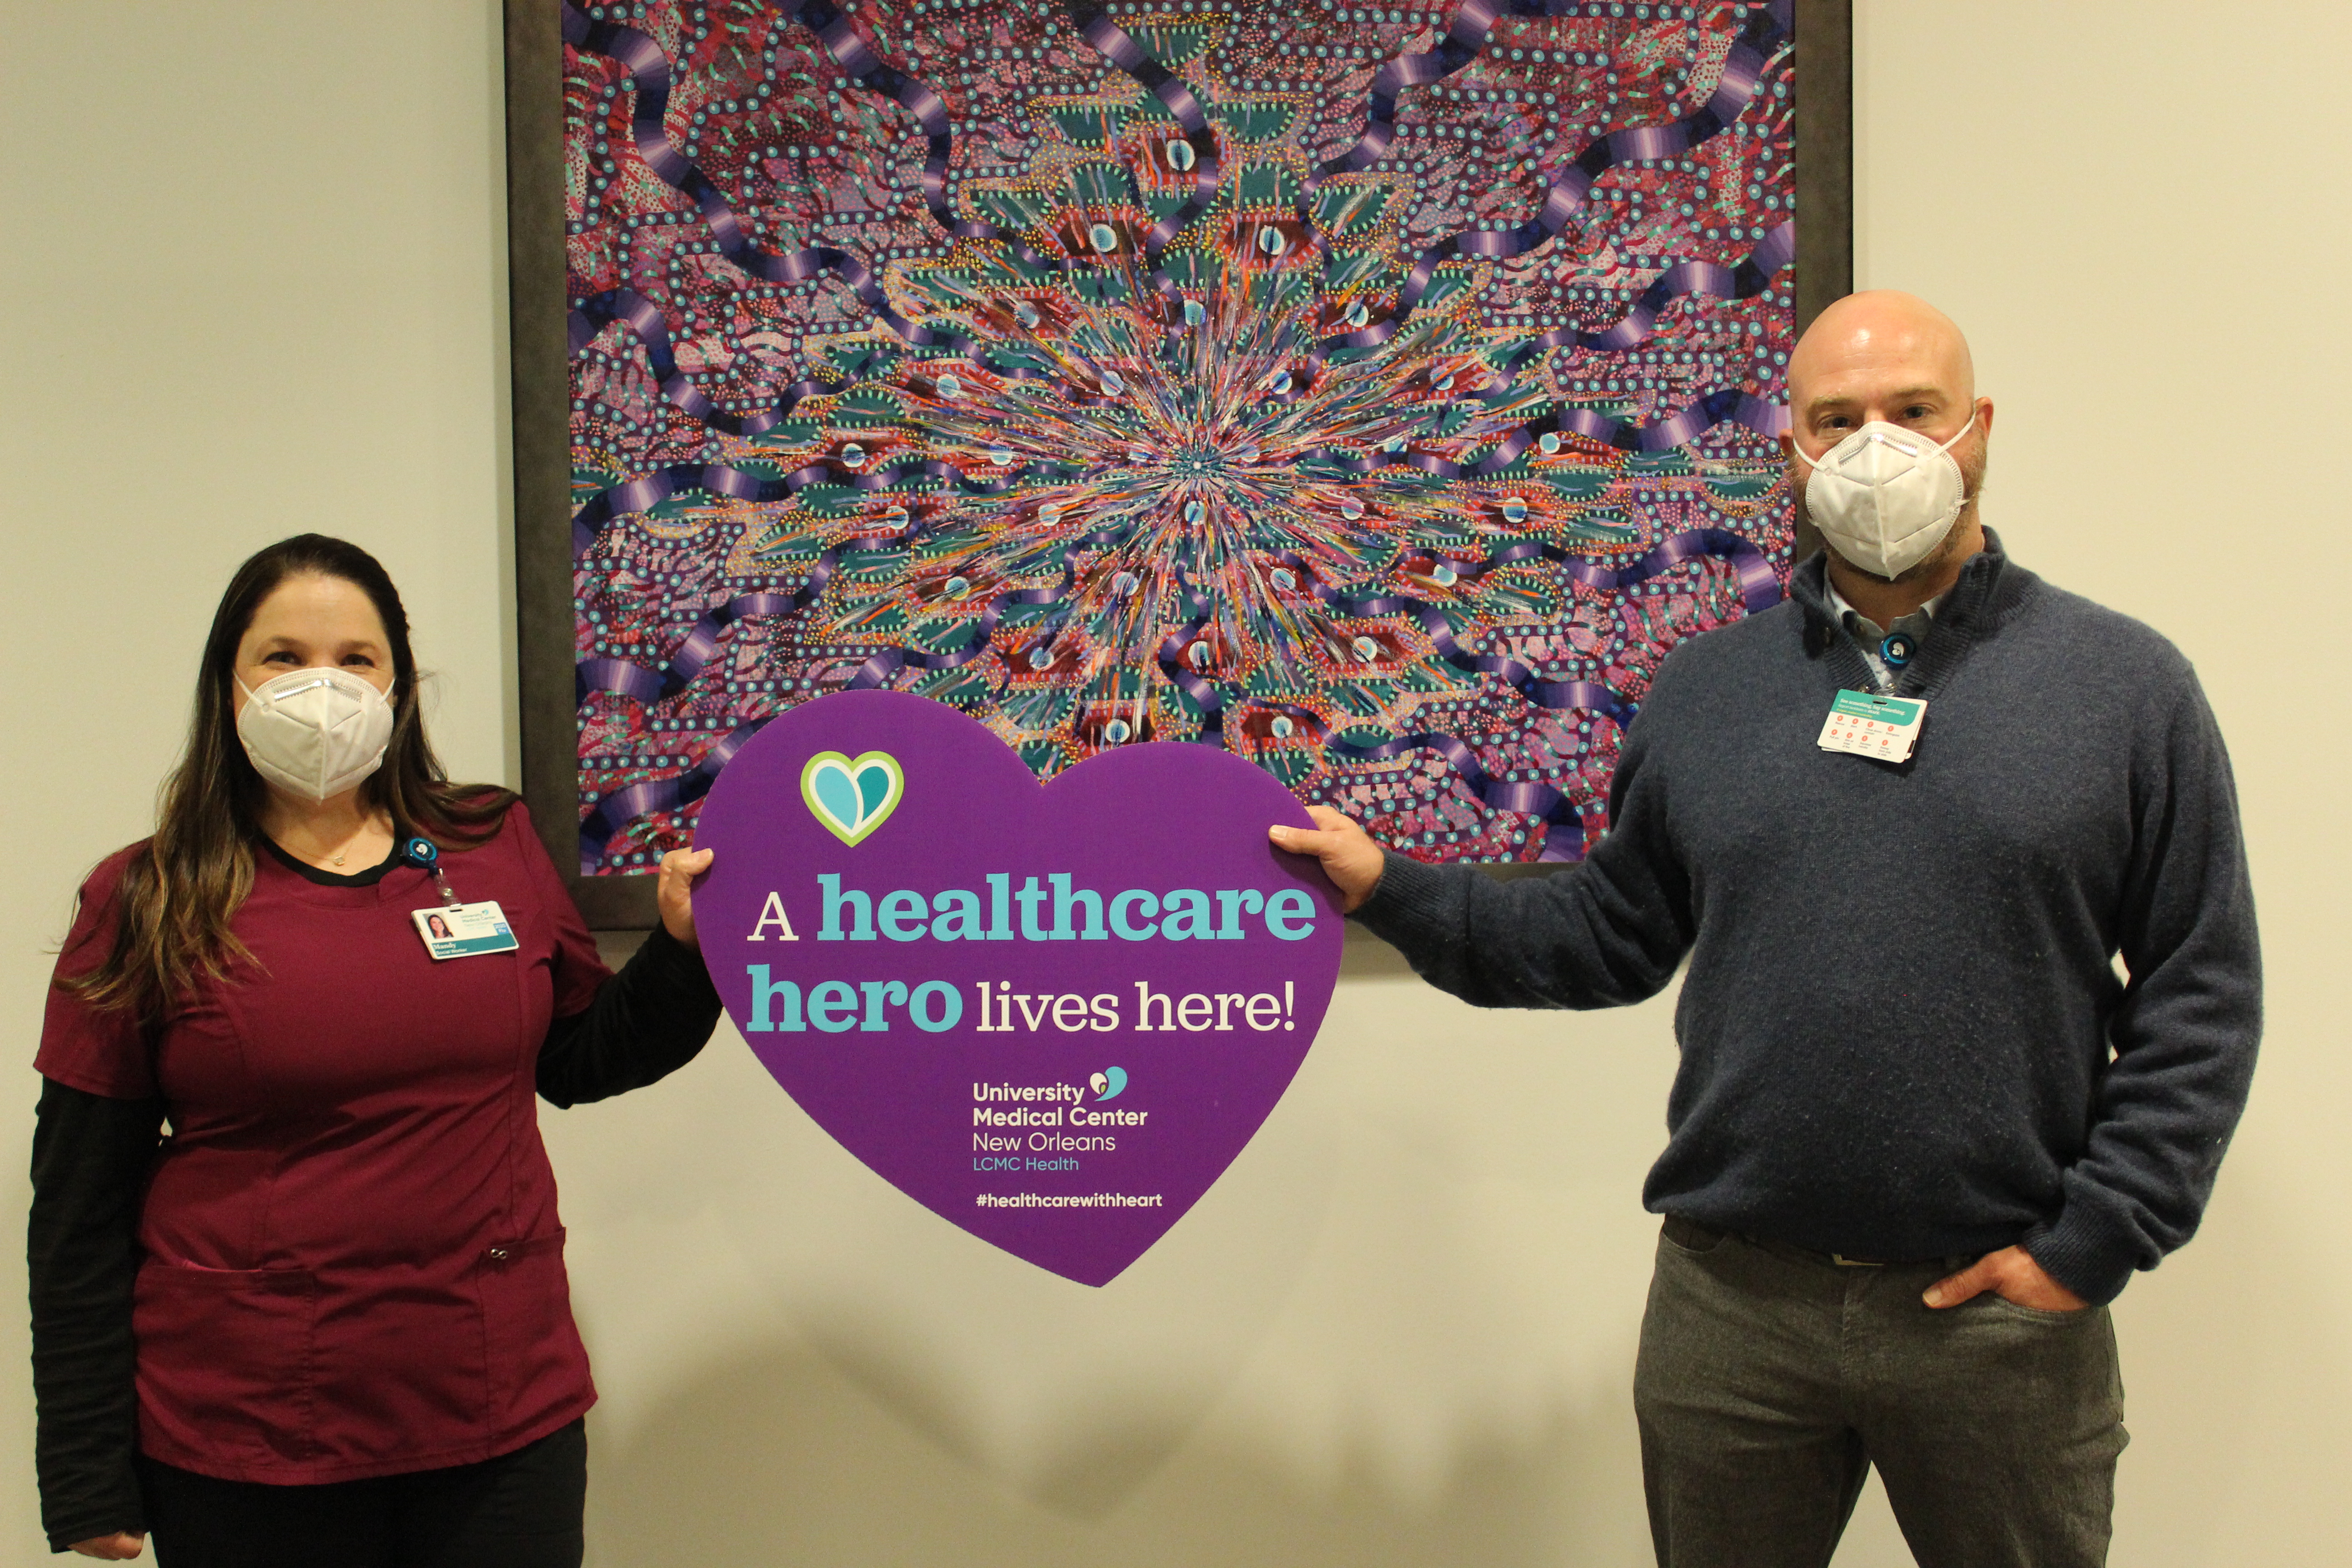 A woman and a man wearing face coverings hold a sign shaped like a purple heart that says "a healthcare hero lives here."